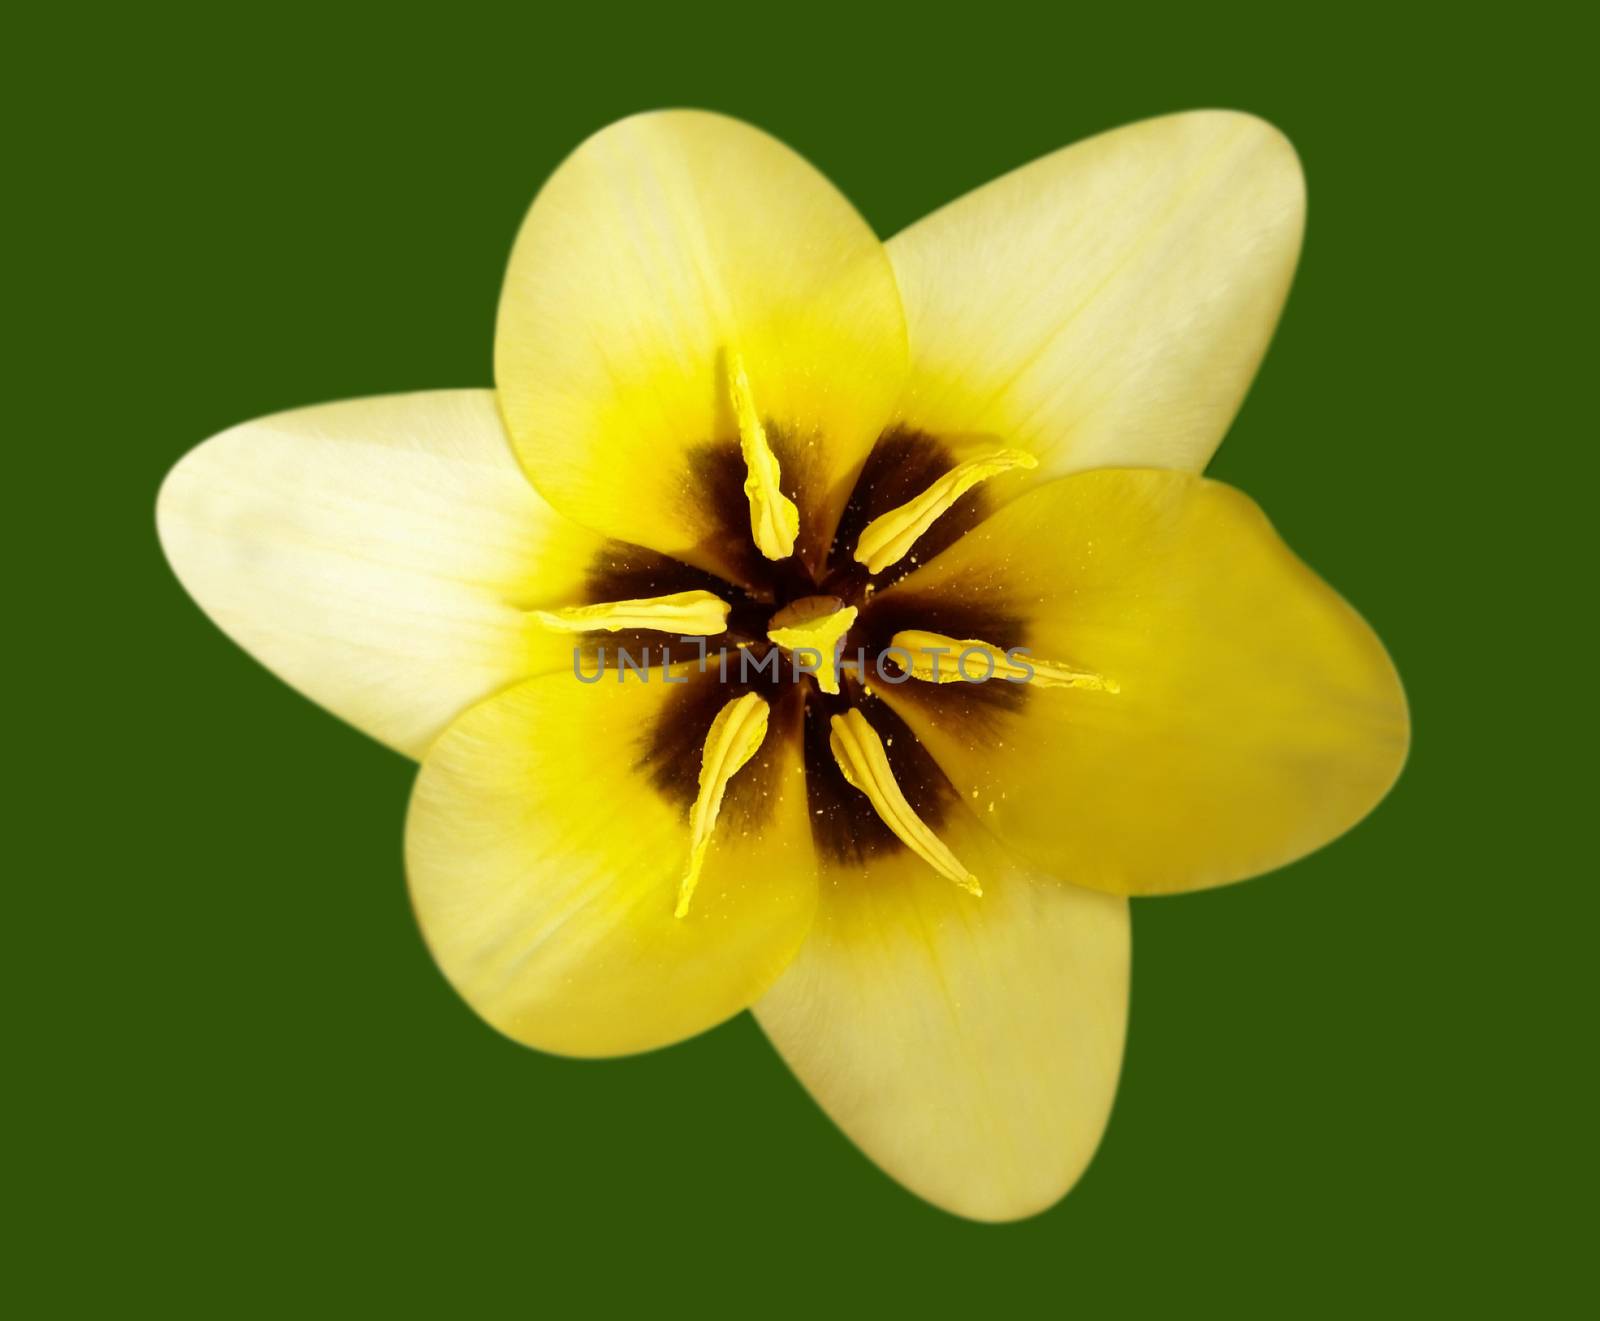 Inside a bud of the tulip flower. Clipping path.